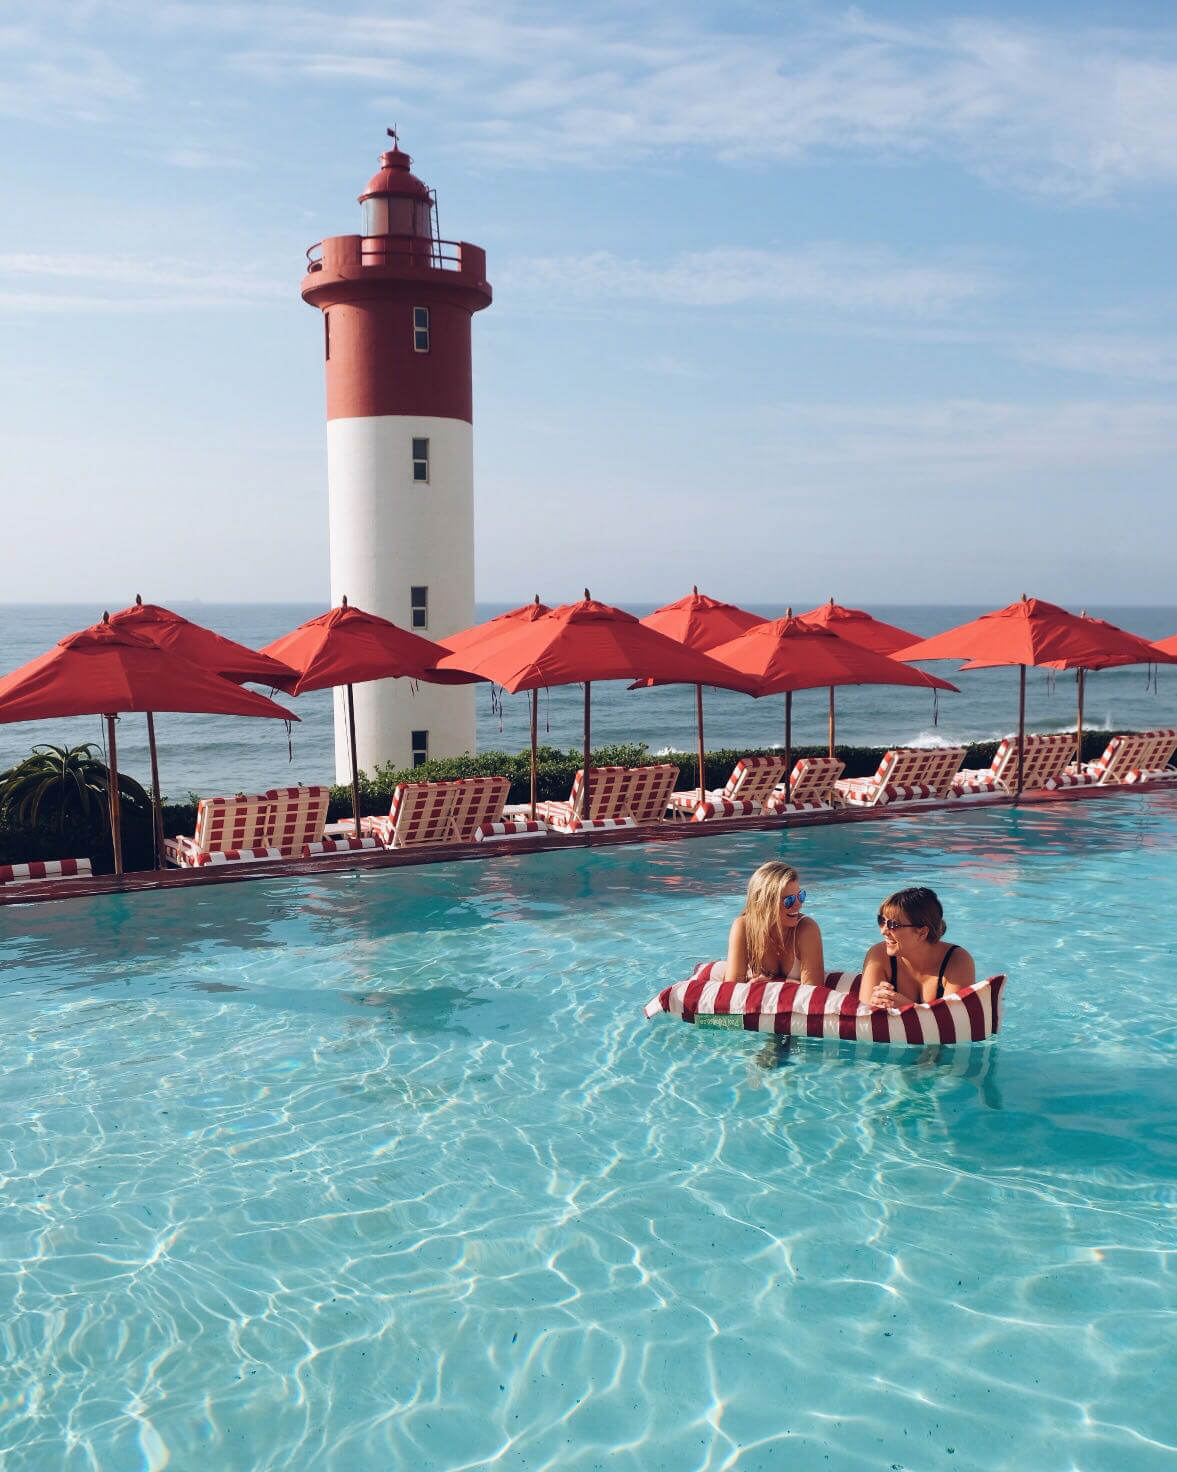 Oysterbox Hotel in Durban, South Africa